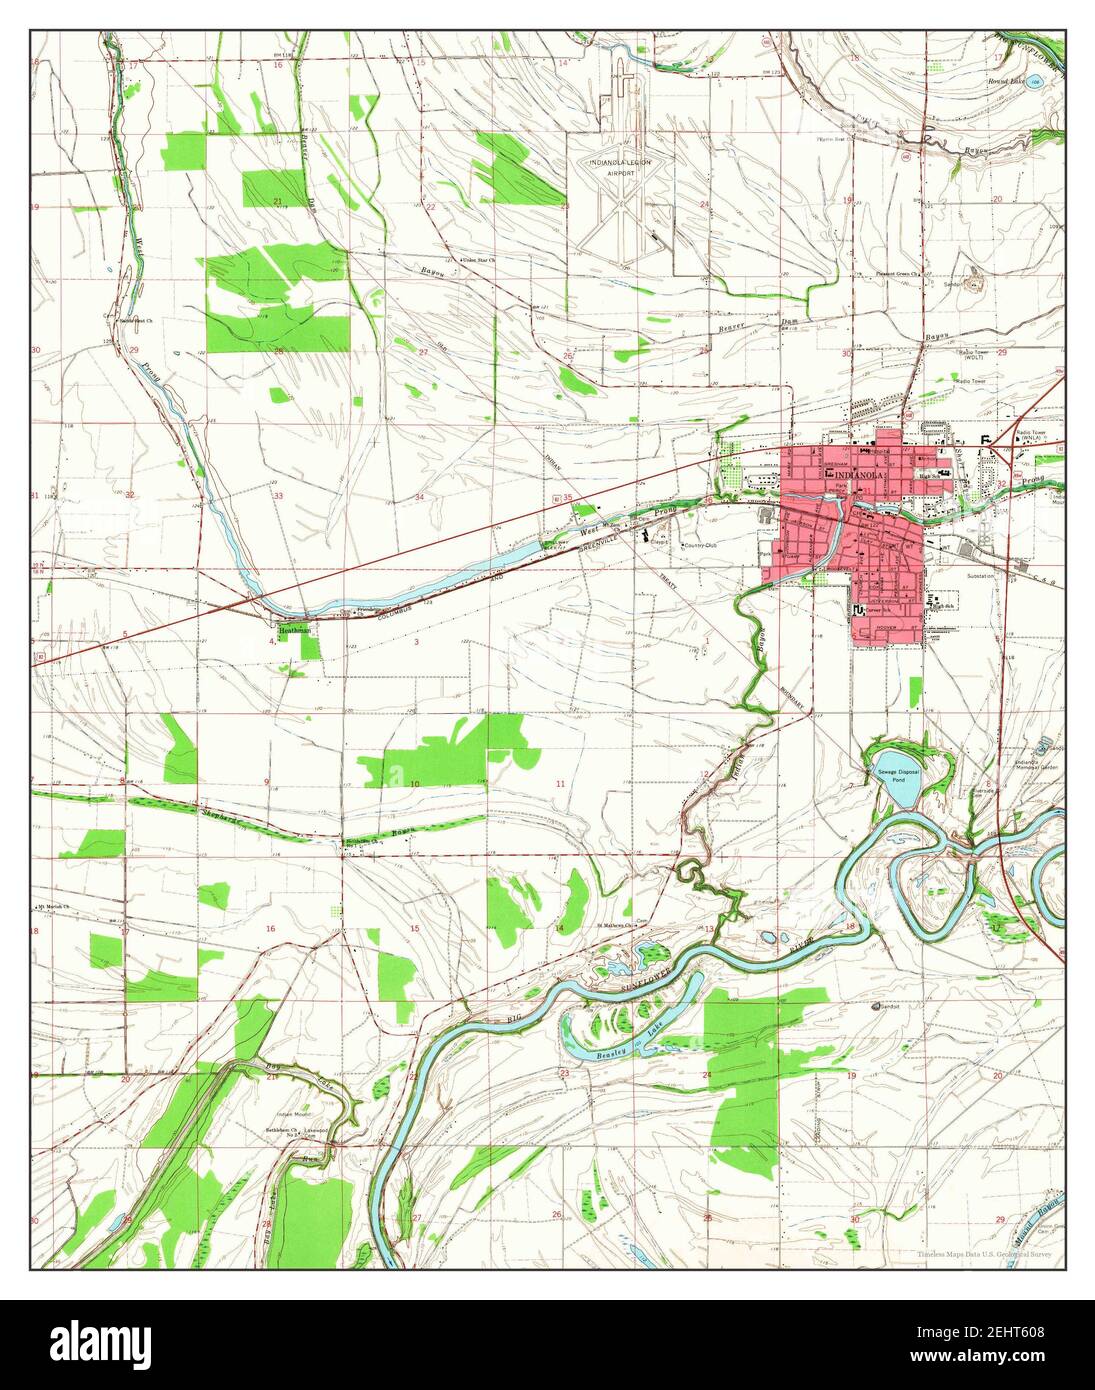 Indianola, Mississippi, map 1965, 1:24000, United States of America by Timeless Maps, data U.S. Geological Survey Stock Photo